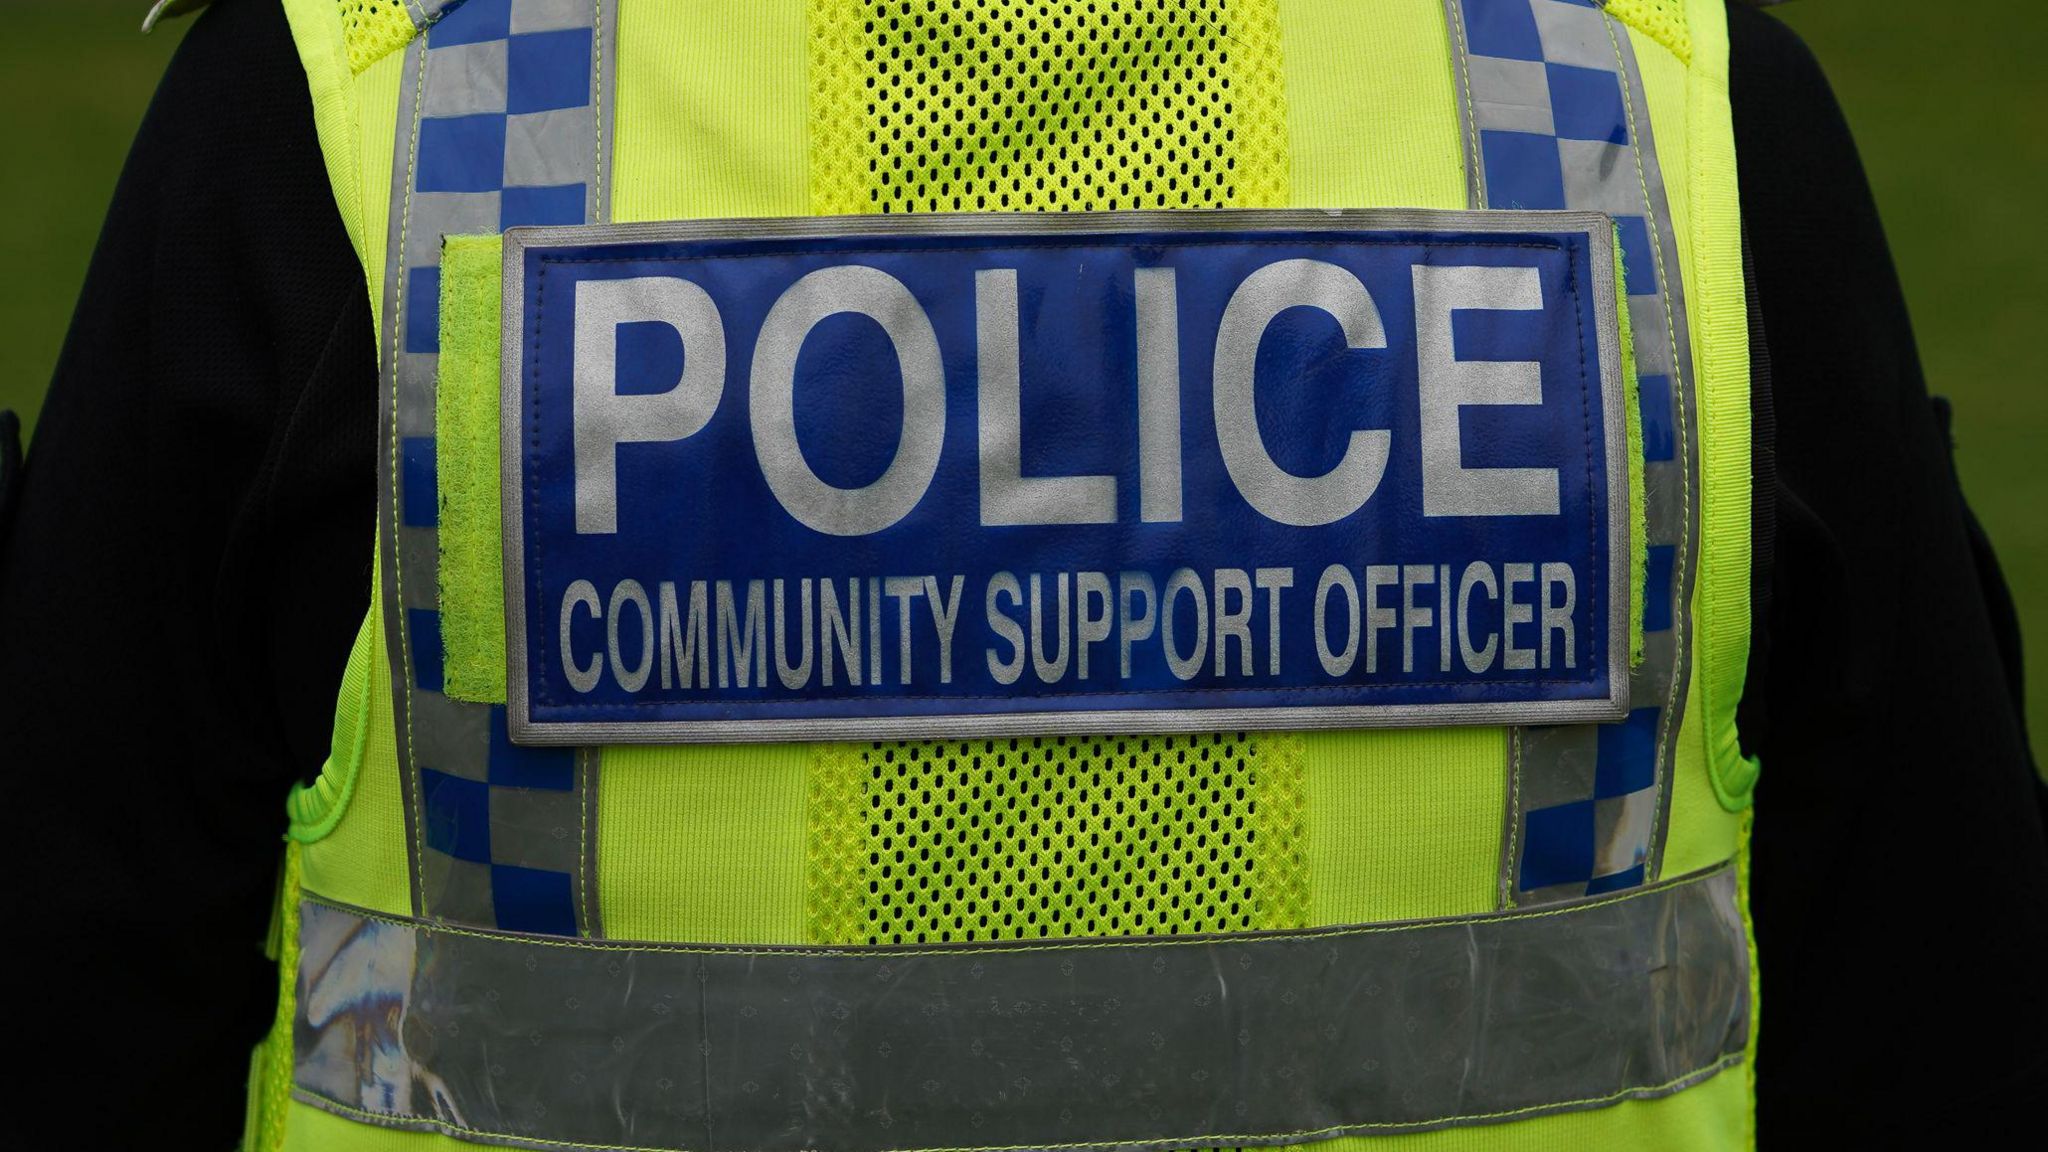 Generic photo of a police community support officer